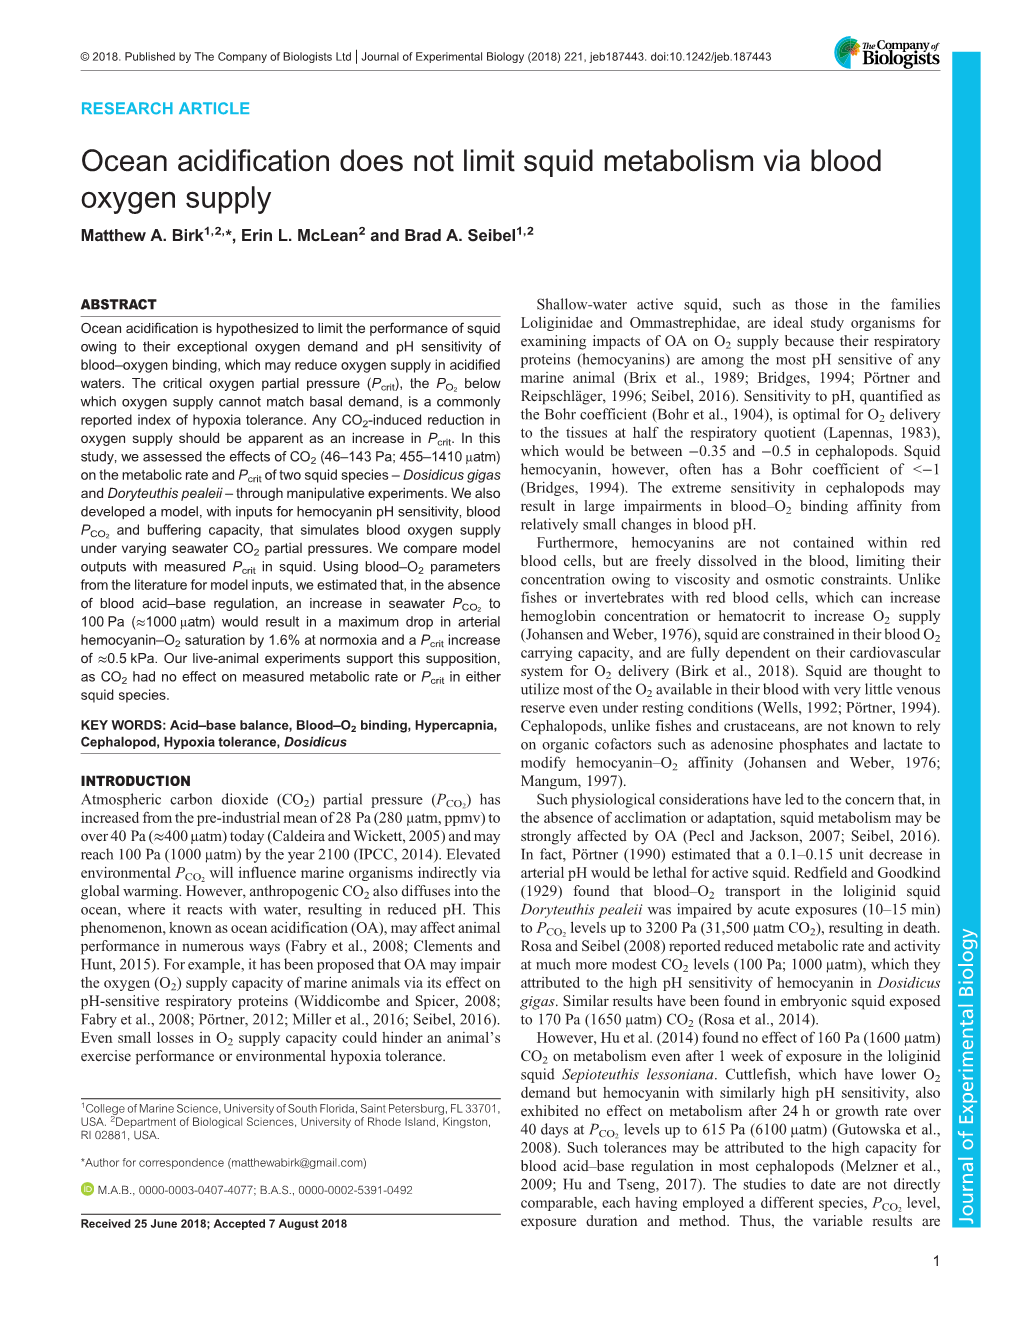 Ocean Acidification Does Not Limit Squid Metabolism Via Blood Oxygen Supply Matthew A